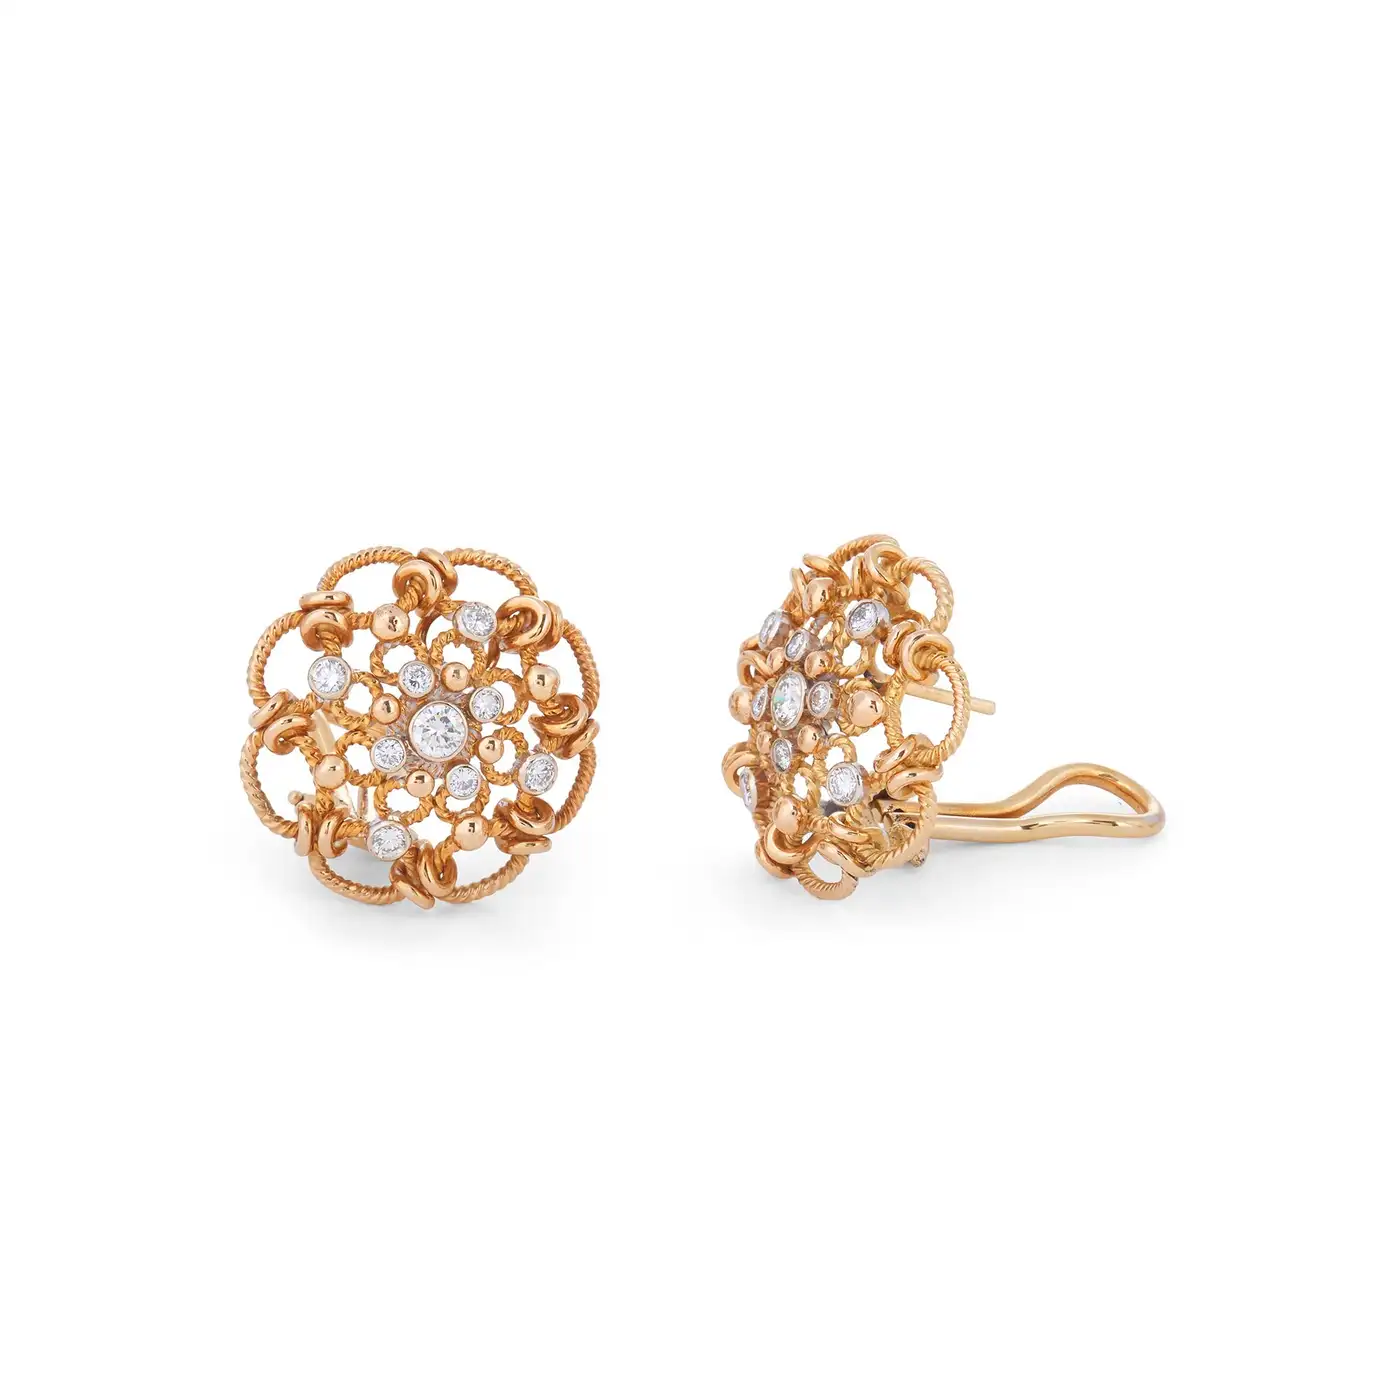 Vintage-Yellow-Gold-and-Diamond-Earrings-4.webp